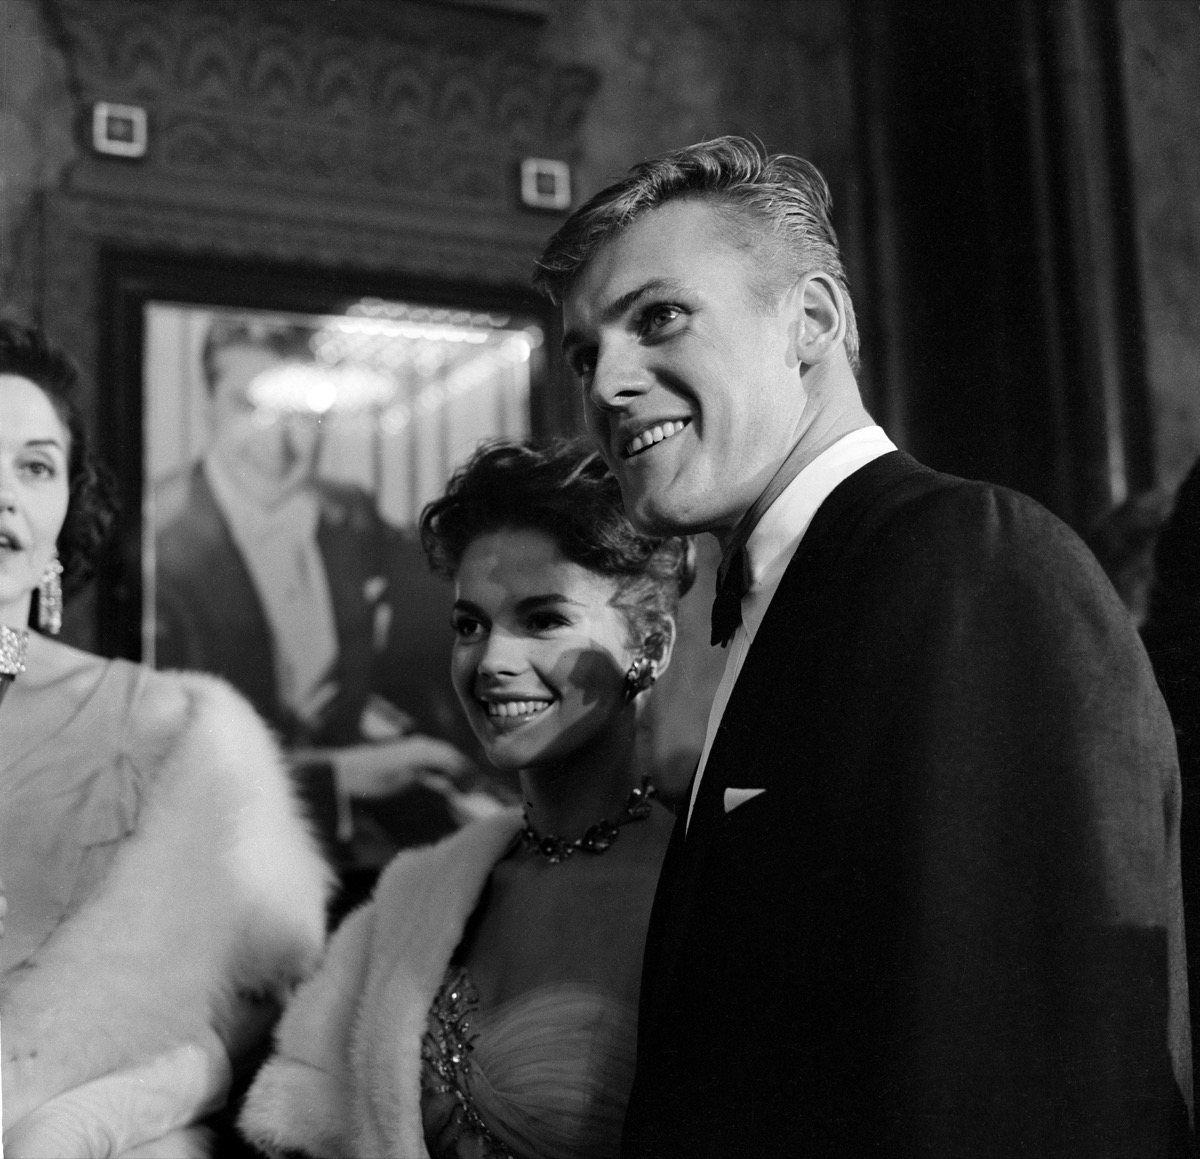 Natalie Wood and Tab Hunter in 1955